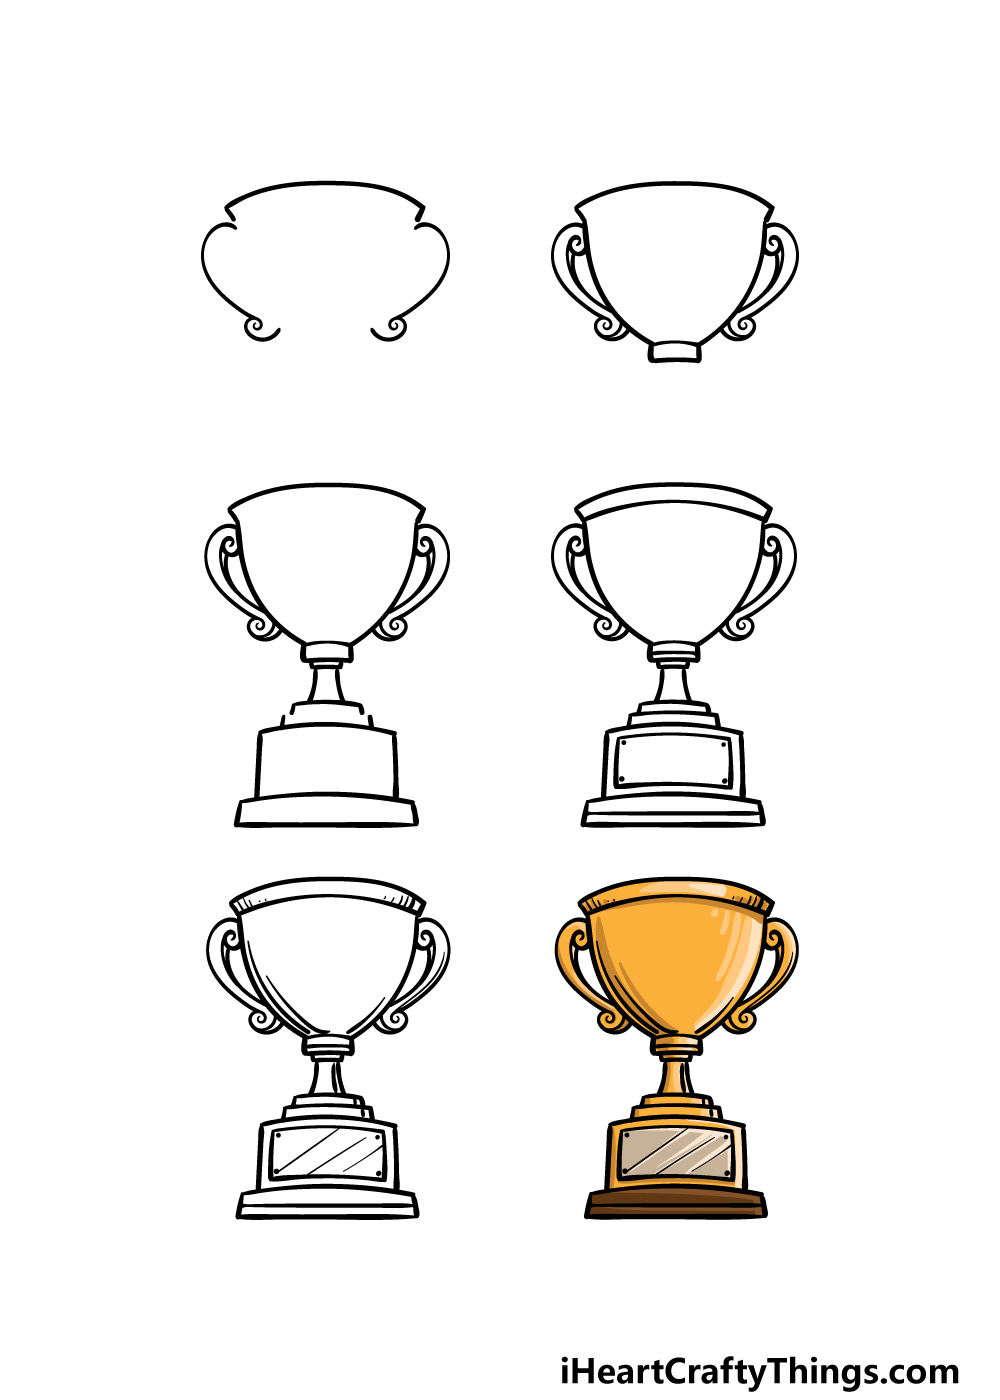 how to draw a trophy in 6 steps